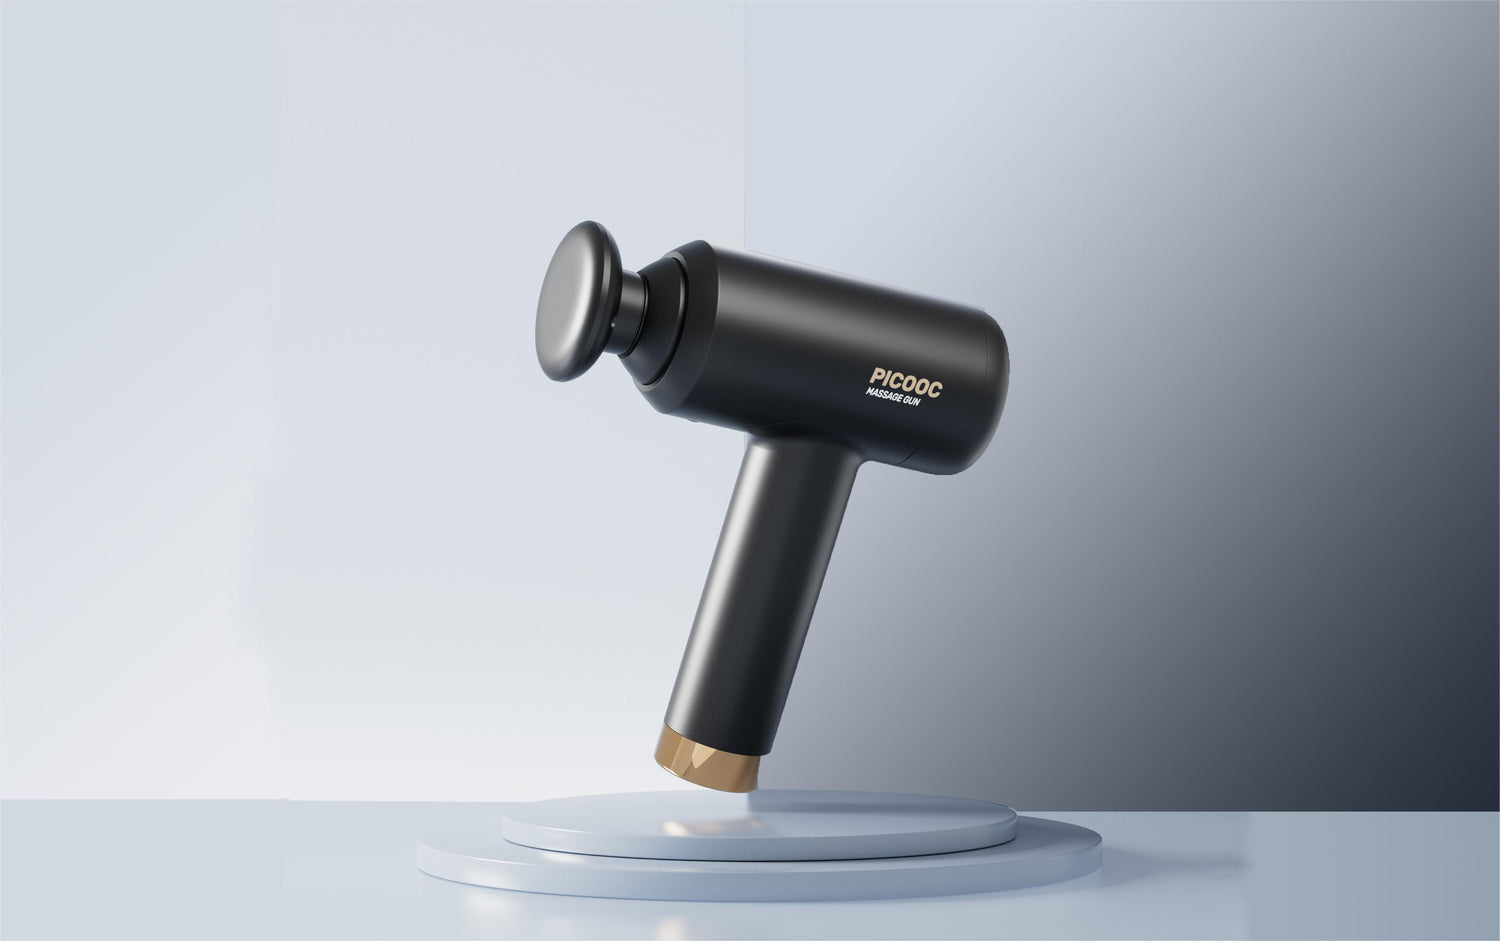 PICOOC Launches H1 Heated Massage Gun to Relieve Deep Muscle Fatigue and Tension Faster and More Effectively PICOOC